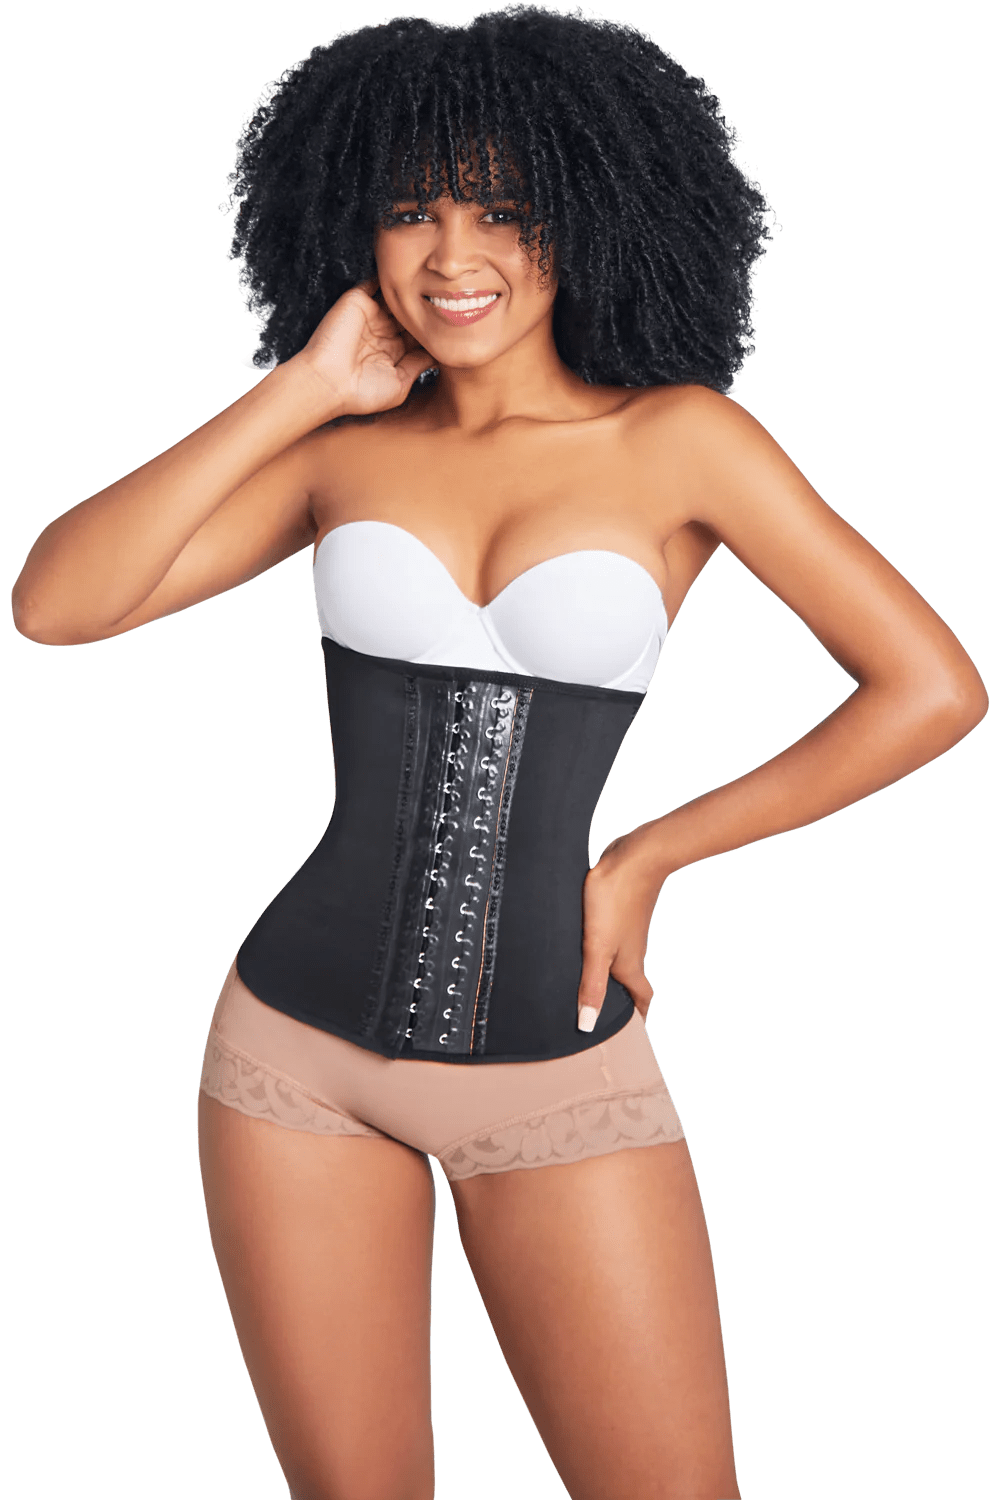 Find Cheap, Fashionable and Slimming colombian waist trainer